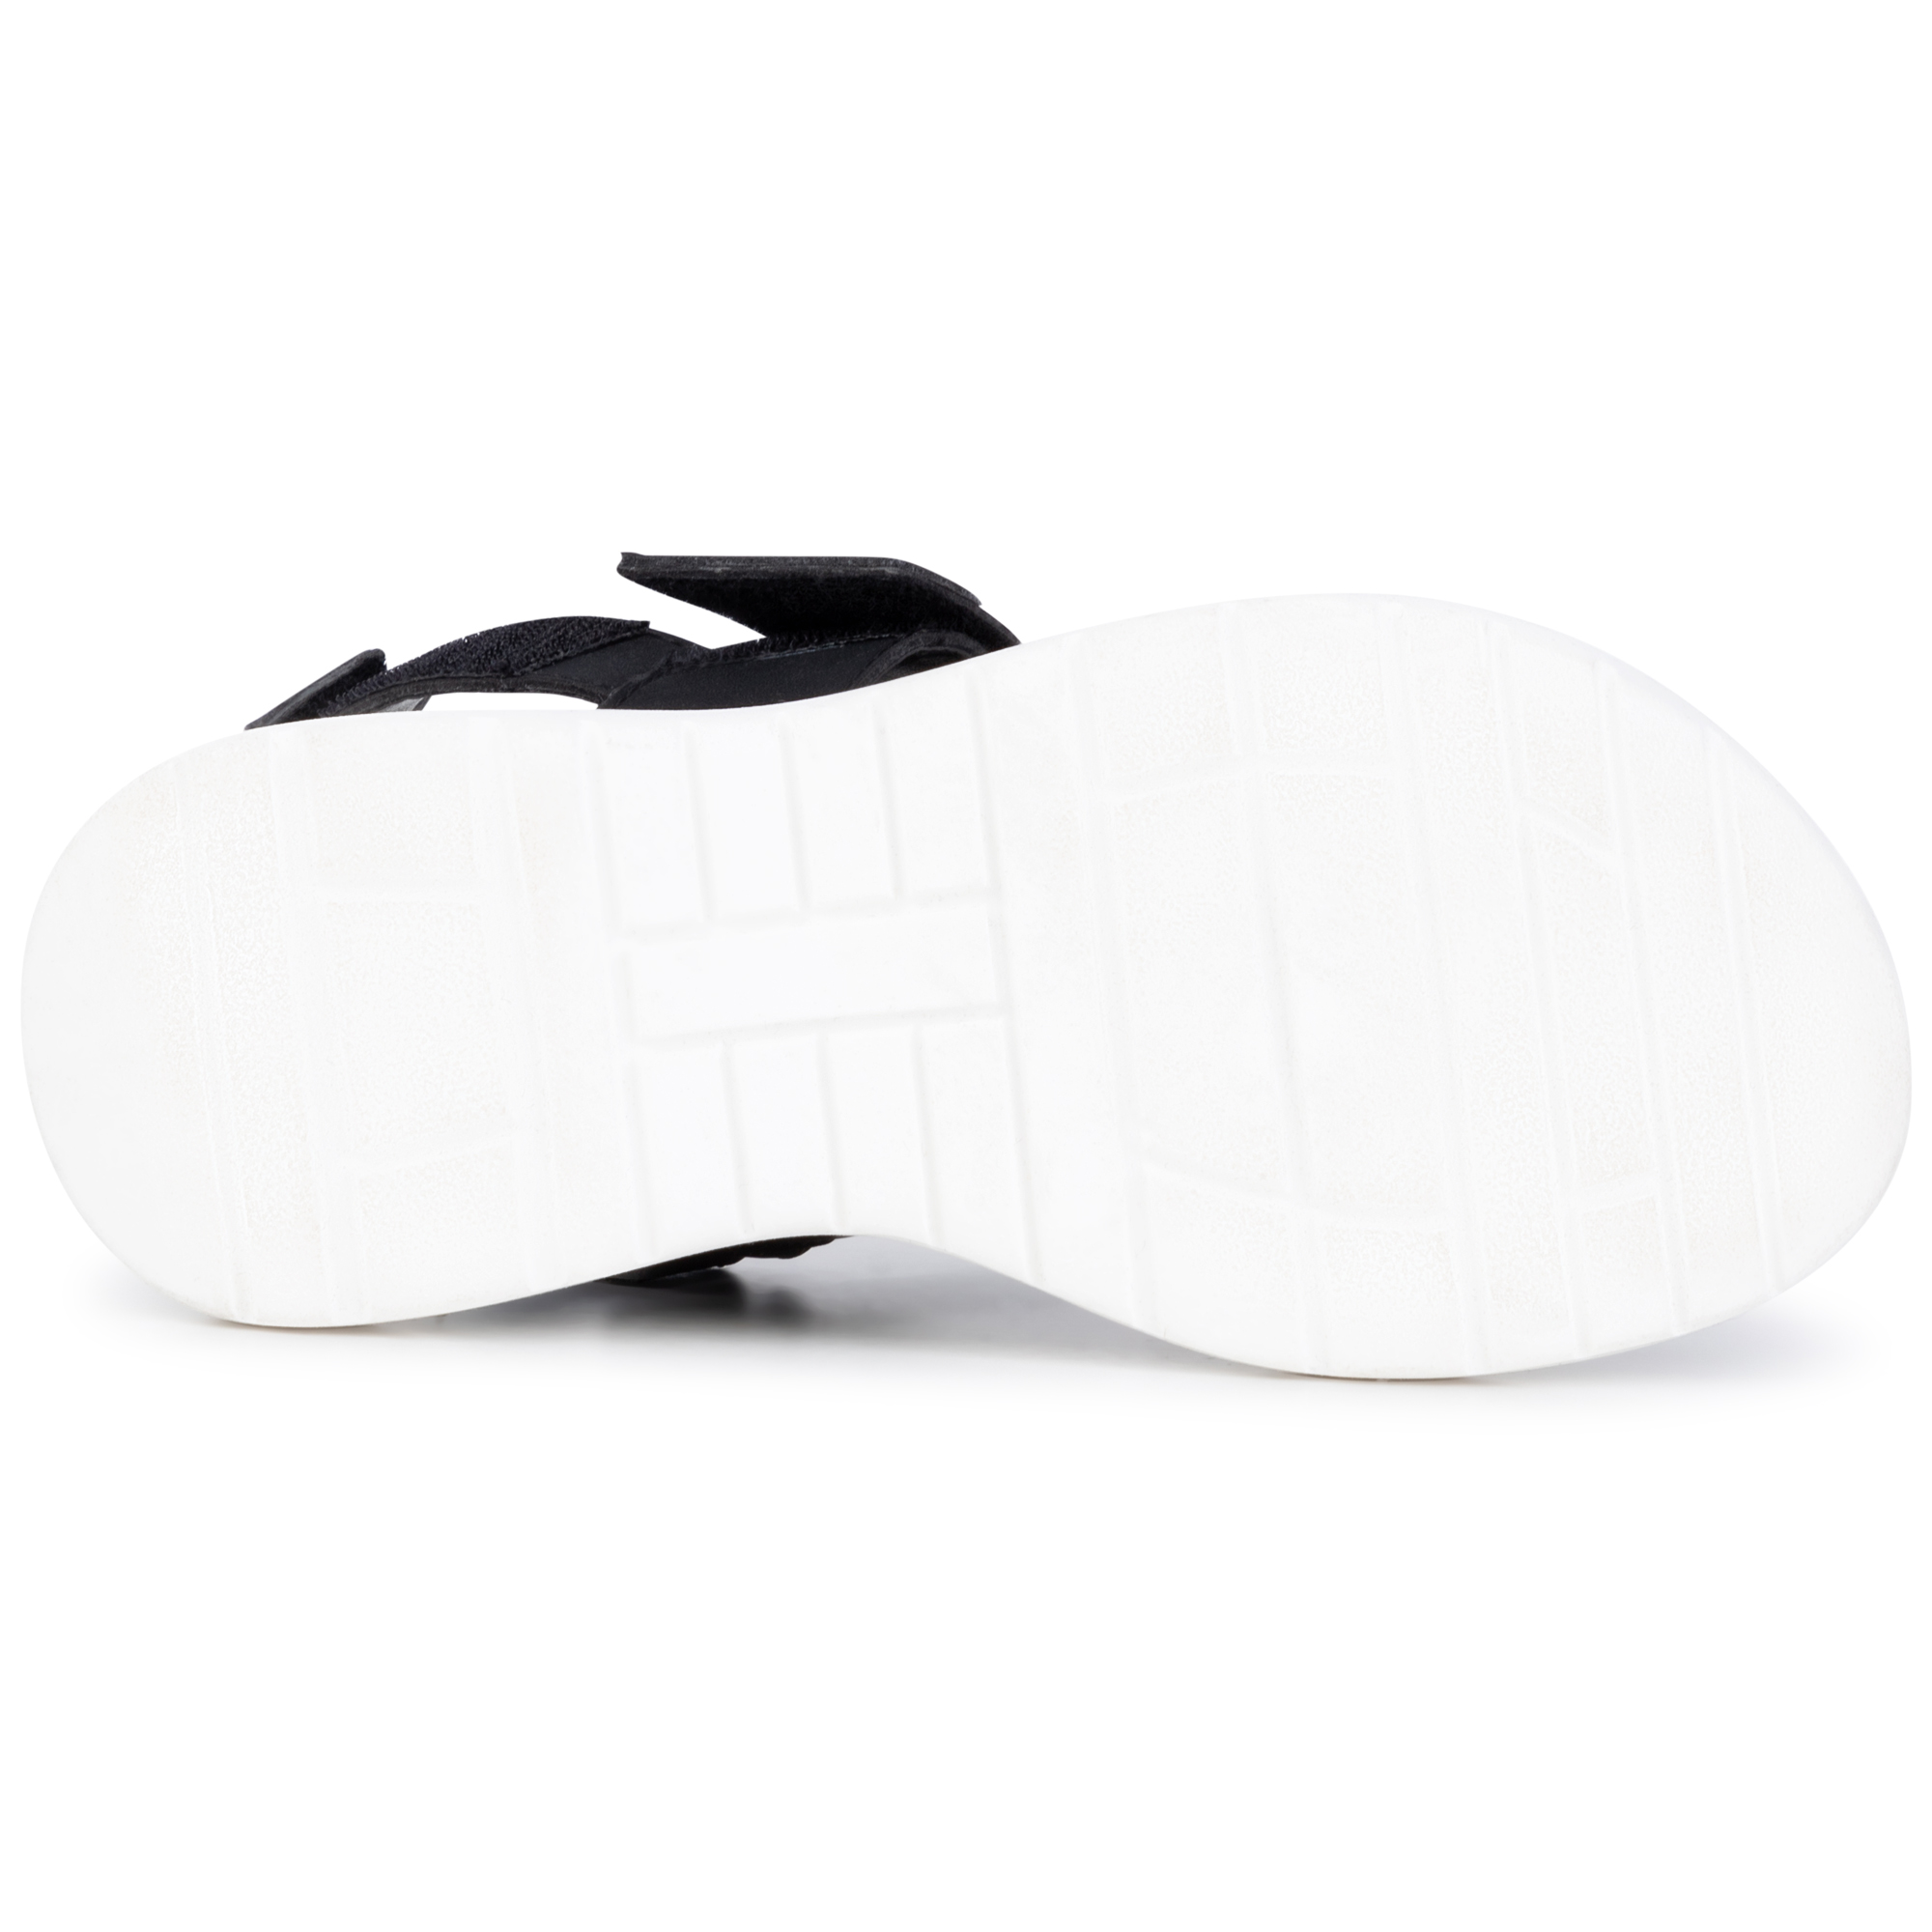 Leather hook-and-loop sandals KARL LAGERFELD KIDS for GIRL